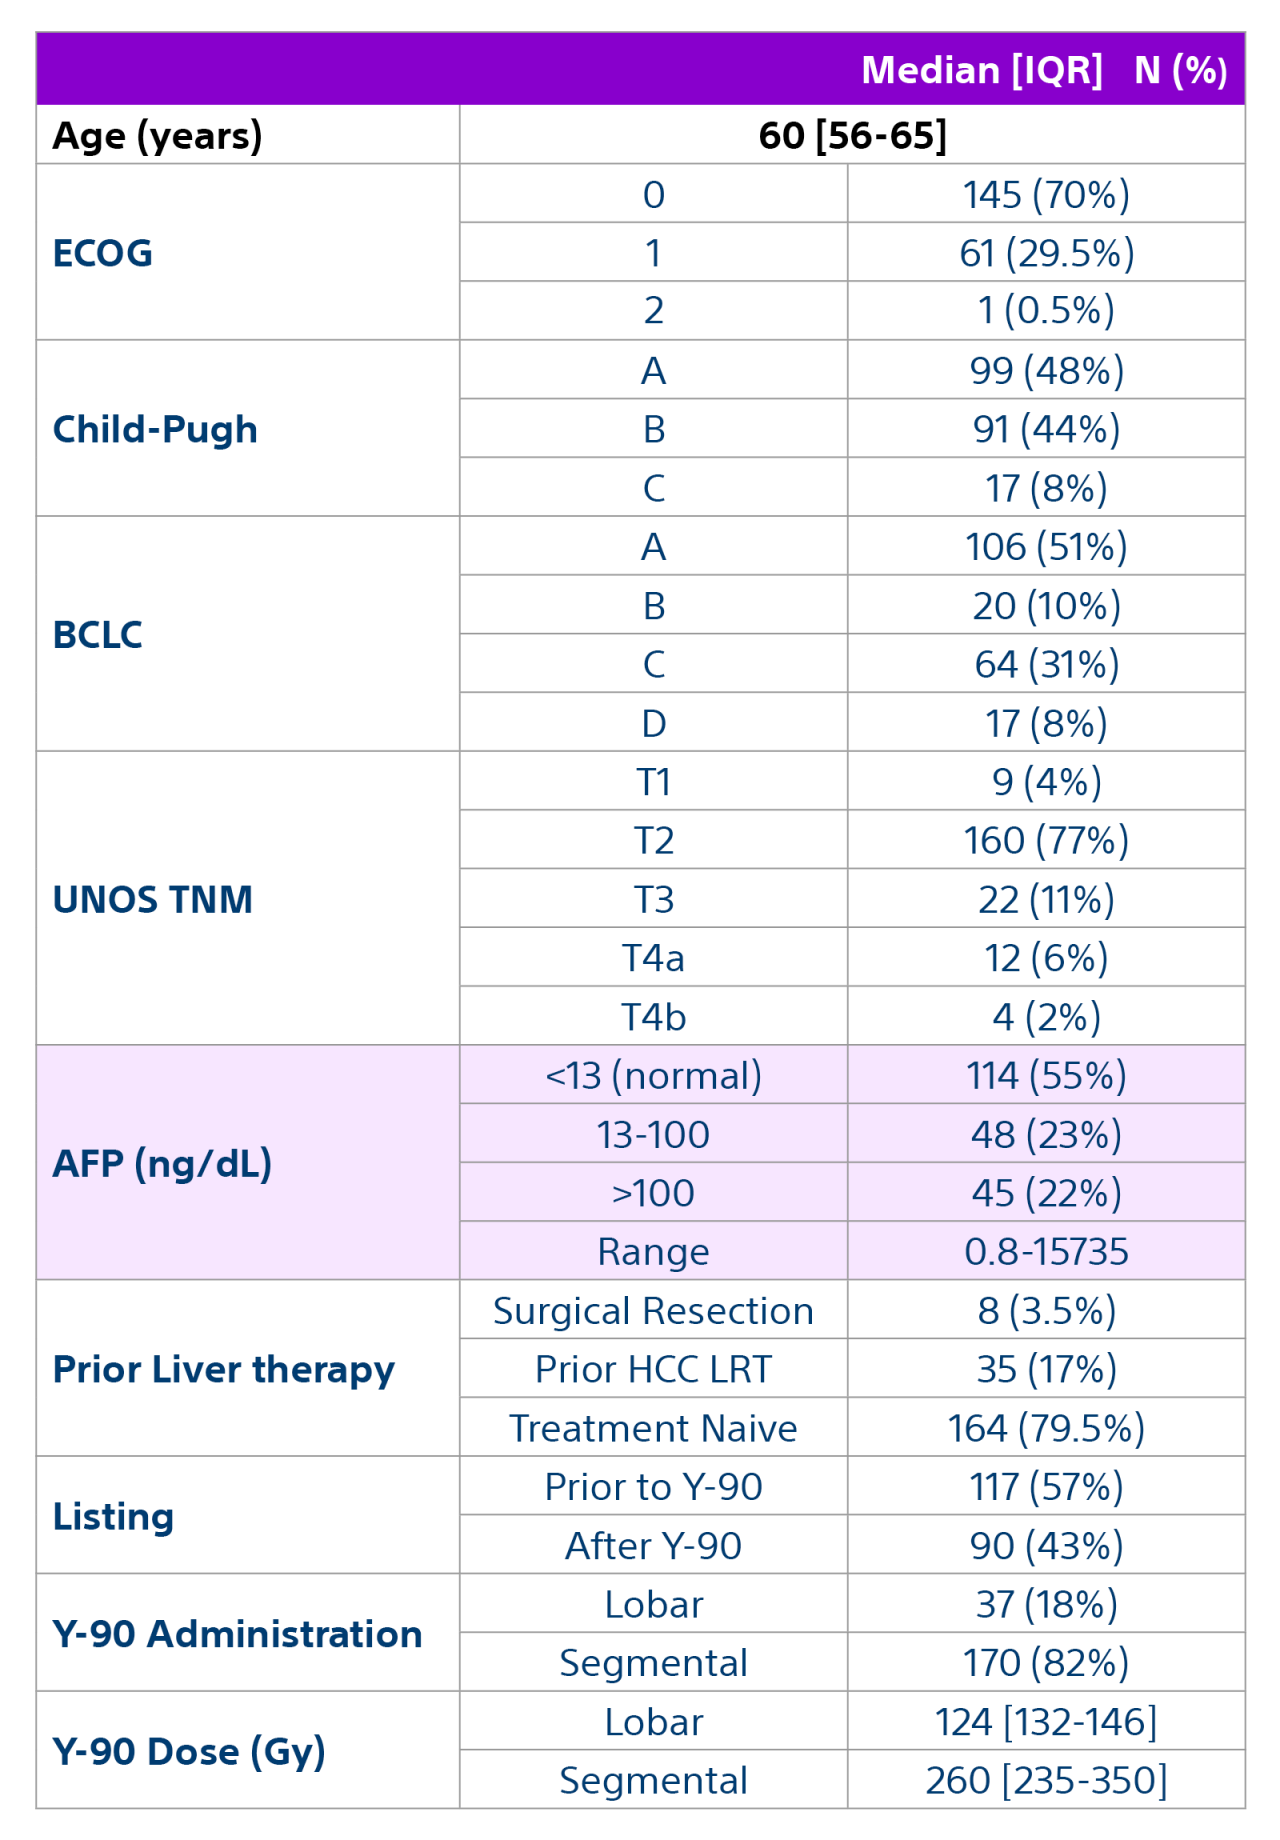 Chart showing ages 60 (56-65) and ECOG, Child-Pugh, BCLC, UNOS TNM, AFP (ng/dL), Prior Liver Therapy, Listing, Y-90 Administration, Y-90 Dose (Gy).